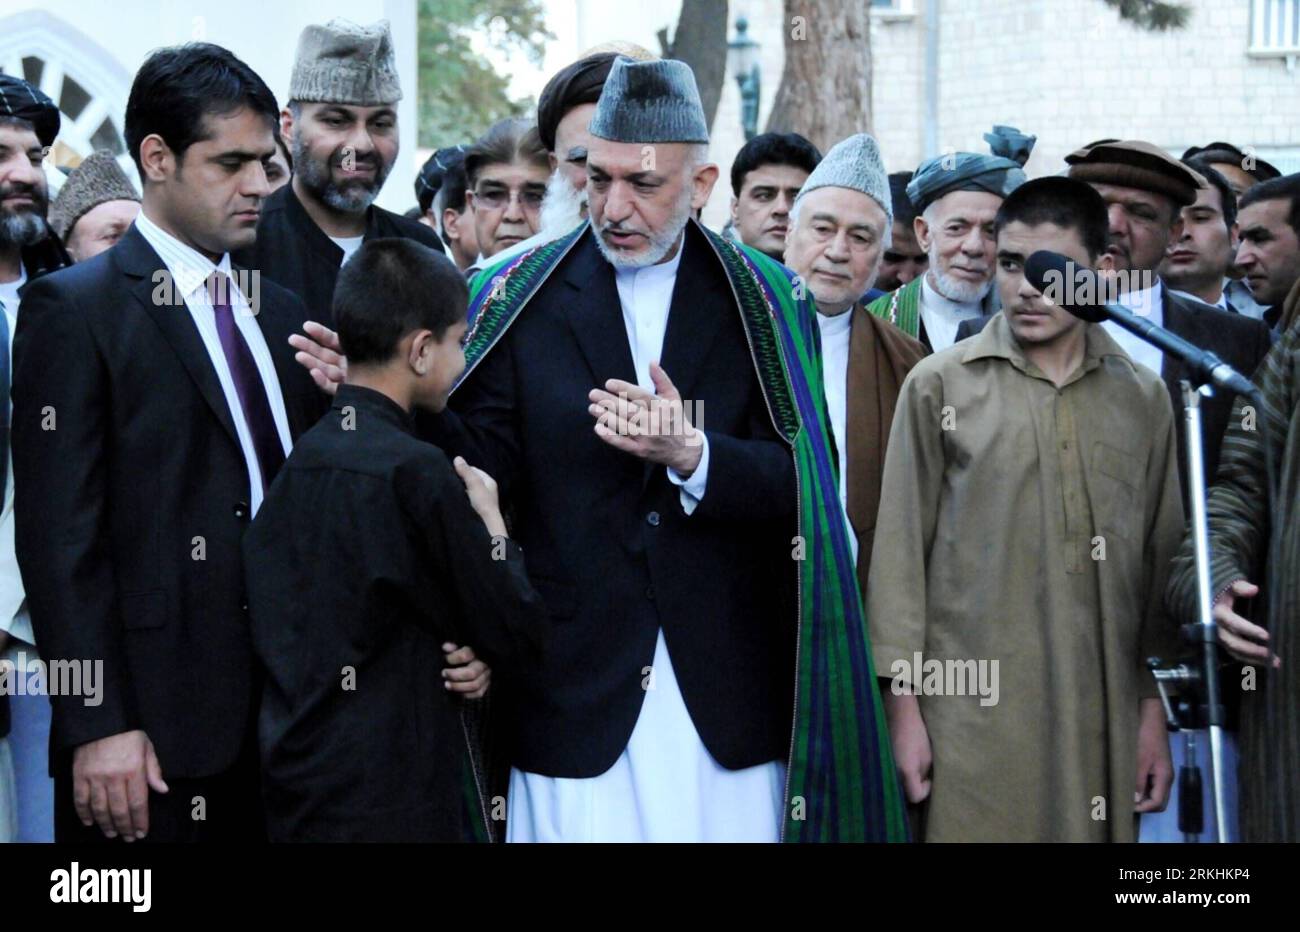 Bildnummer: 55853548  Datum: 30.08.2011  Copyright: imago/Xinhua (110830) -- KABUL, Aug. 30, 2011 (Xinhua) -- Afghan President Hamid Karzai embraces a would-be suicide bomber after Eid al-Fitr prayer during a ceremony to mark the release of eight suicide bombers who are under 18, at the presidential palace in Kabul on Aug. 30, 2011. Karzai on Tuesday called on Taliban to give up insurgency and join the peace and reintegration process, denouncing use of children as suicide bombers. (Xinhua/Omid) AFGHANISTAN-KABUL-KARZAI PUBLICATIONxNOTxINxCHN People Politik xtm 2011 quer premiumd     Bildnummer Stockfoto